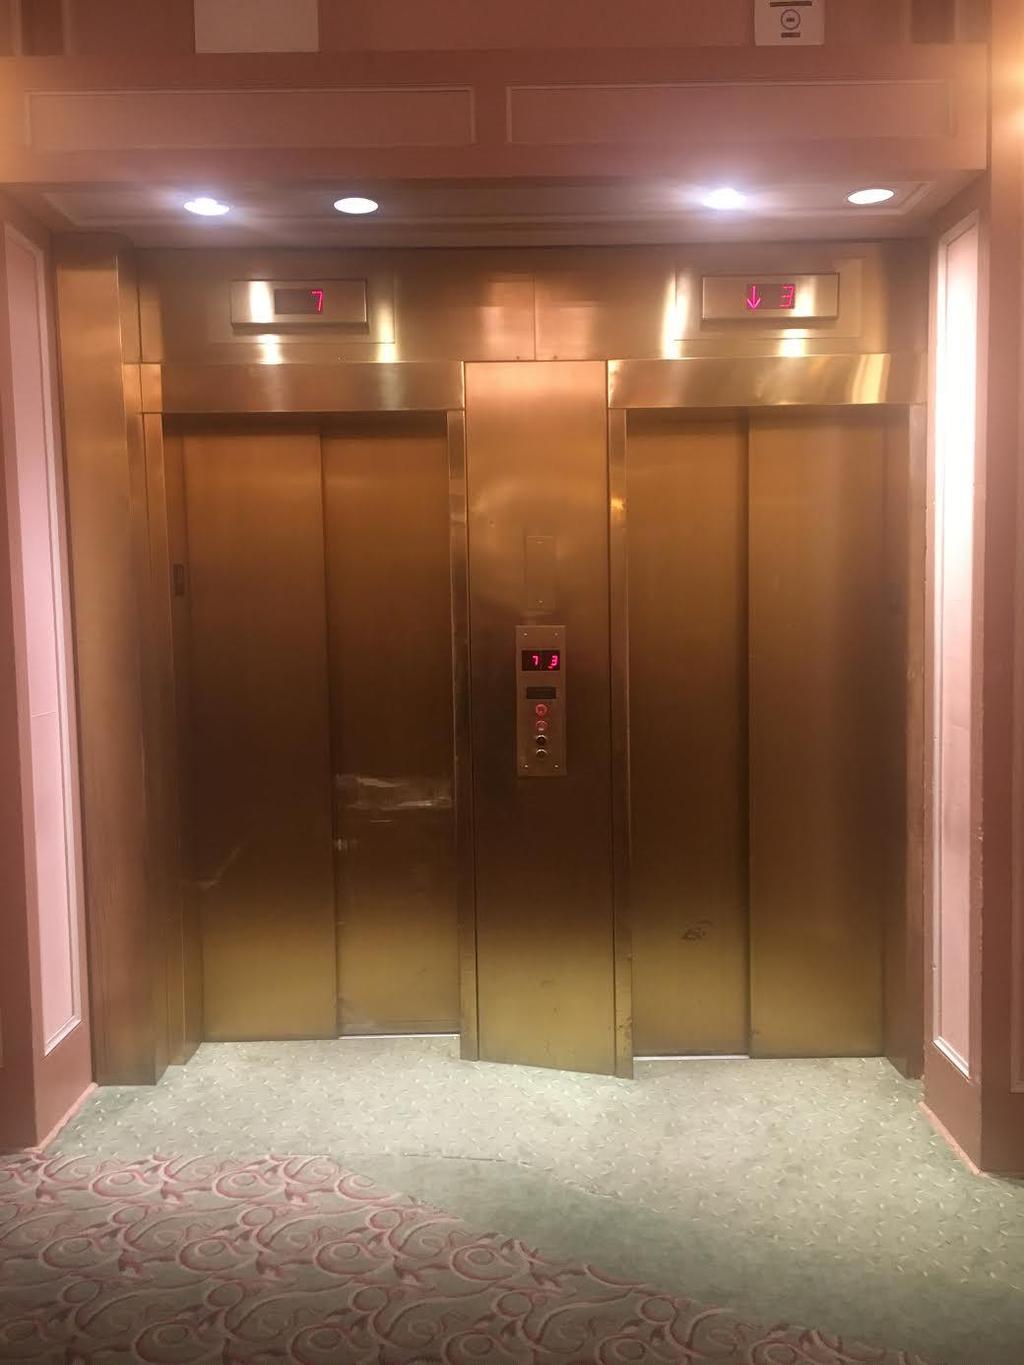 elevators I may have to ride in an elevator to get to my